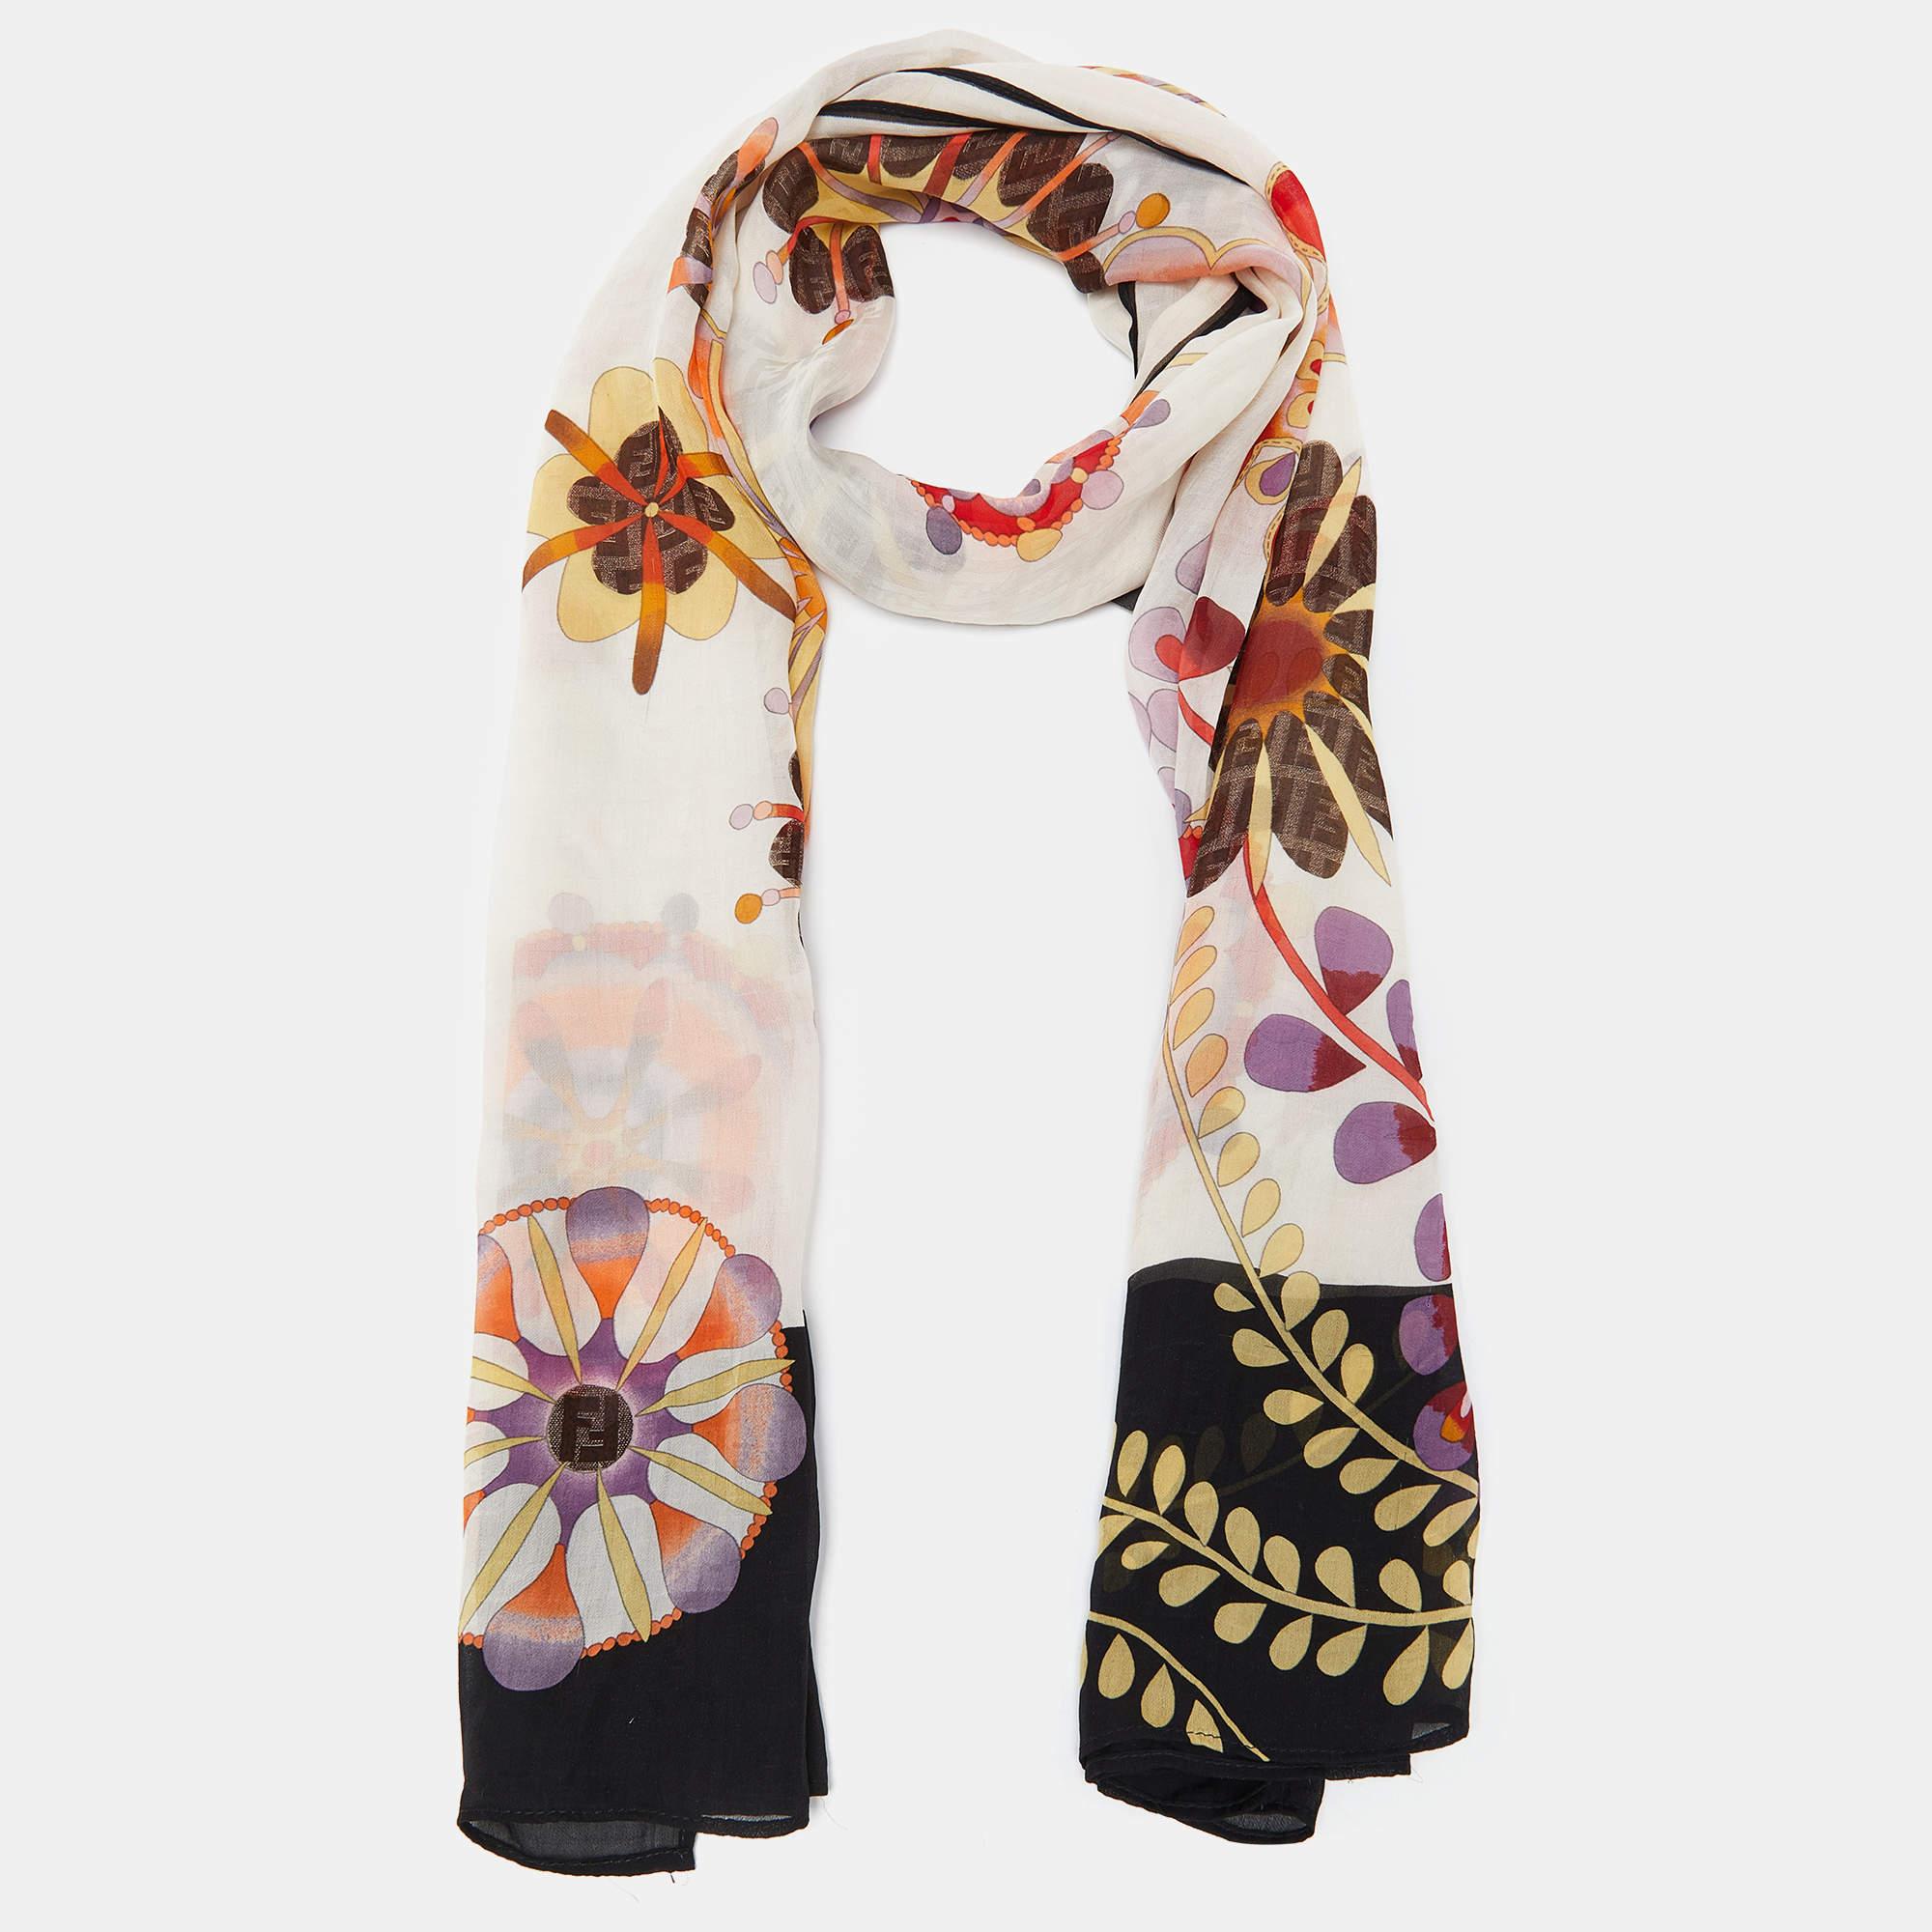 Elevate your style with this meticulously crafted stole. Prints and timeless design unite for an exquisite accessory that exudes sophistication and style.

